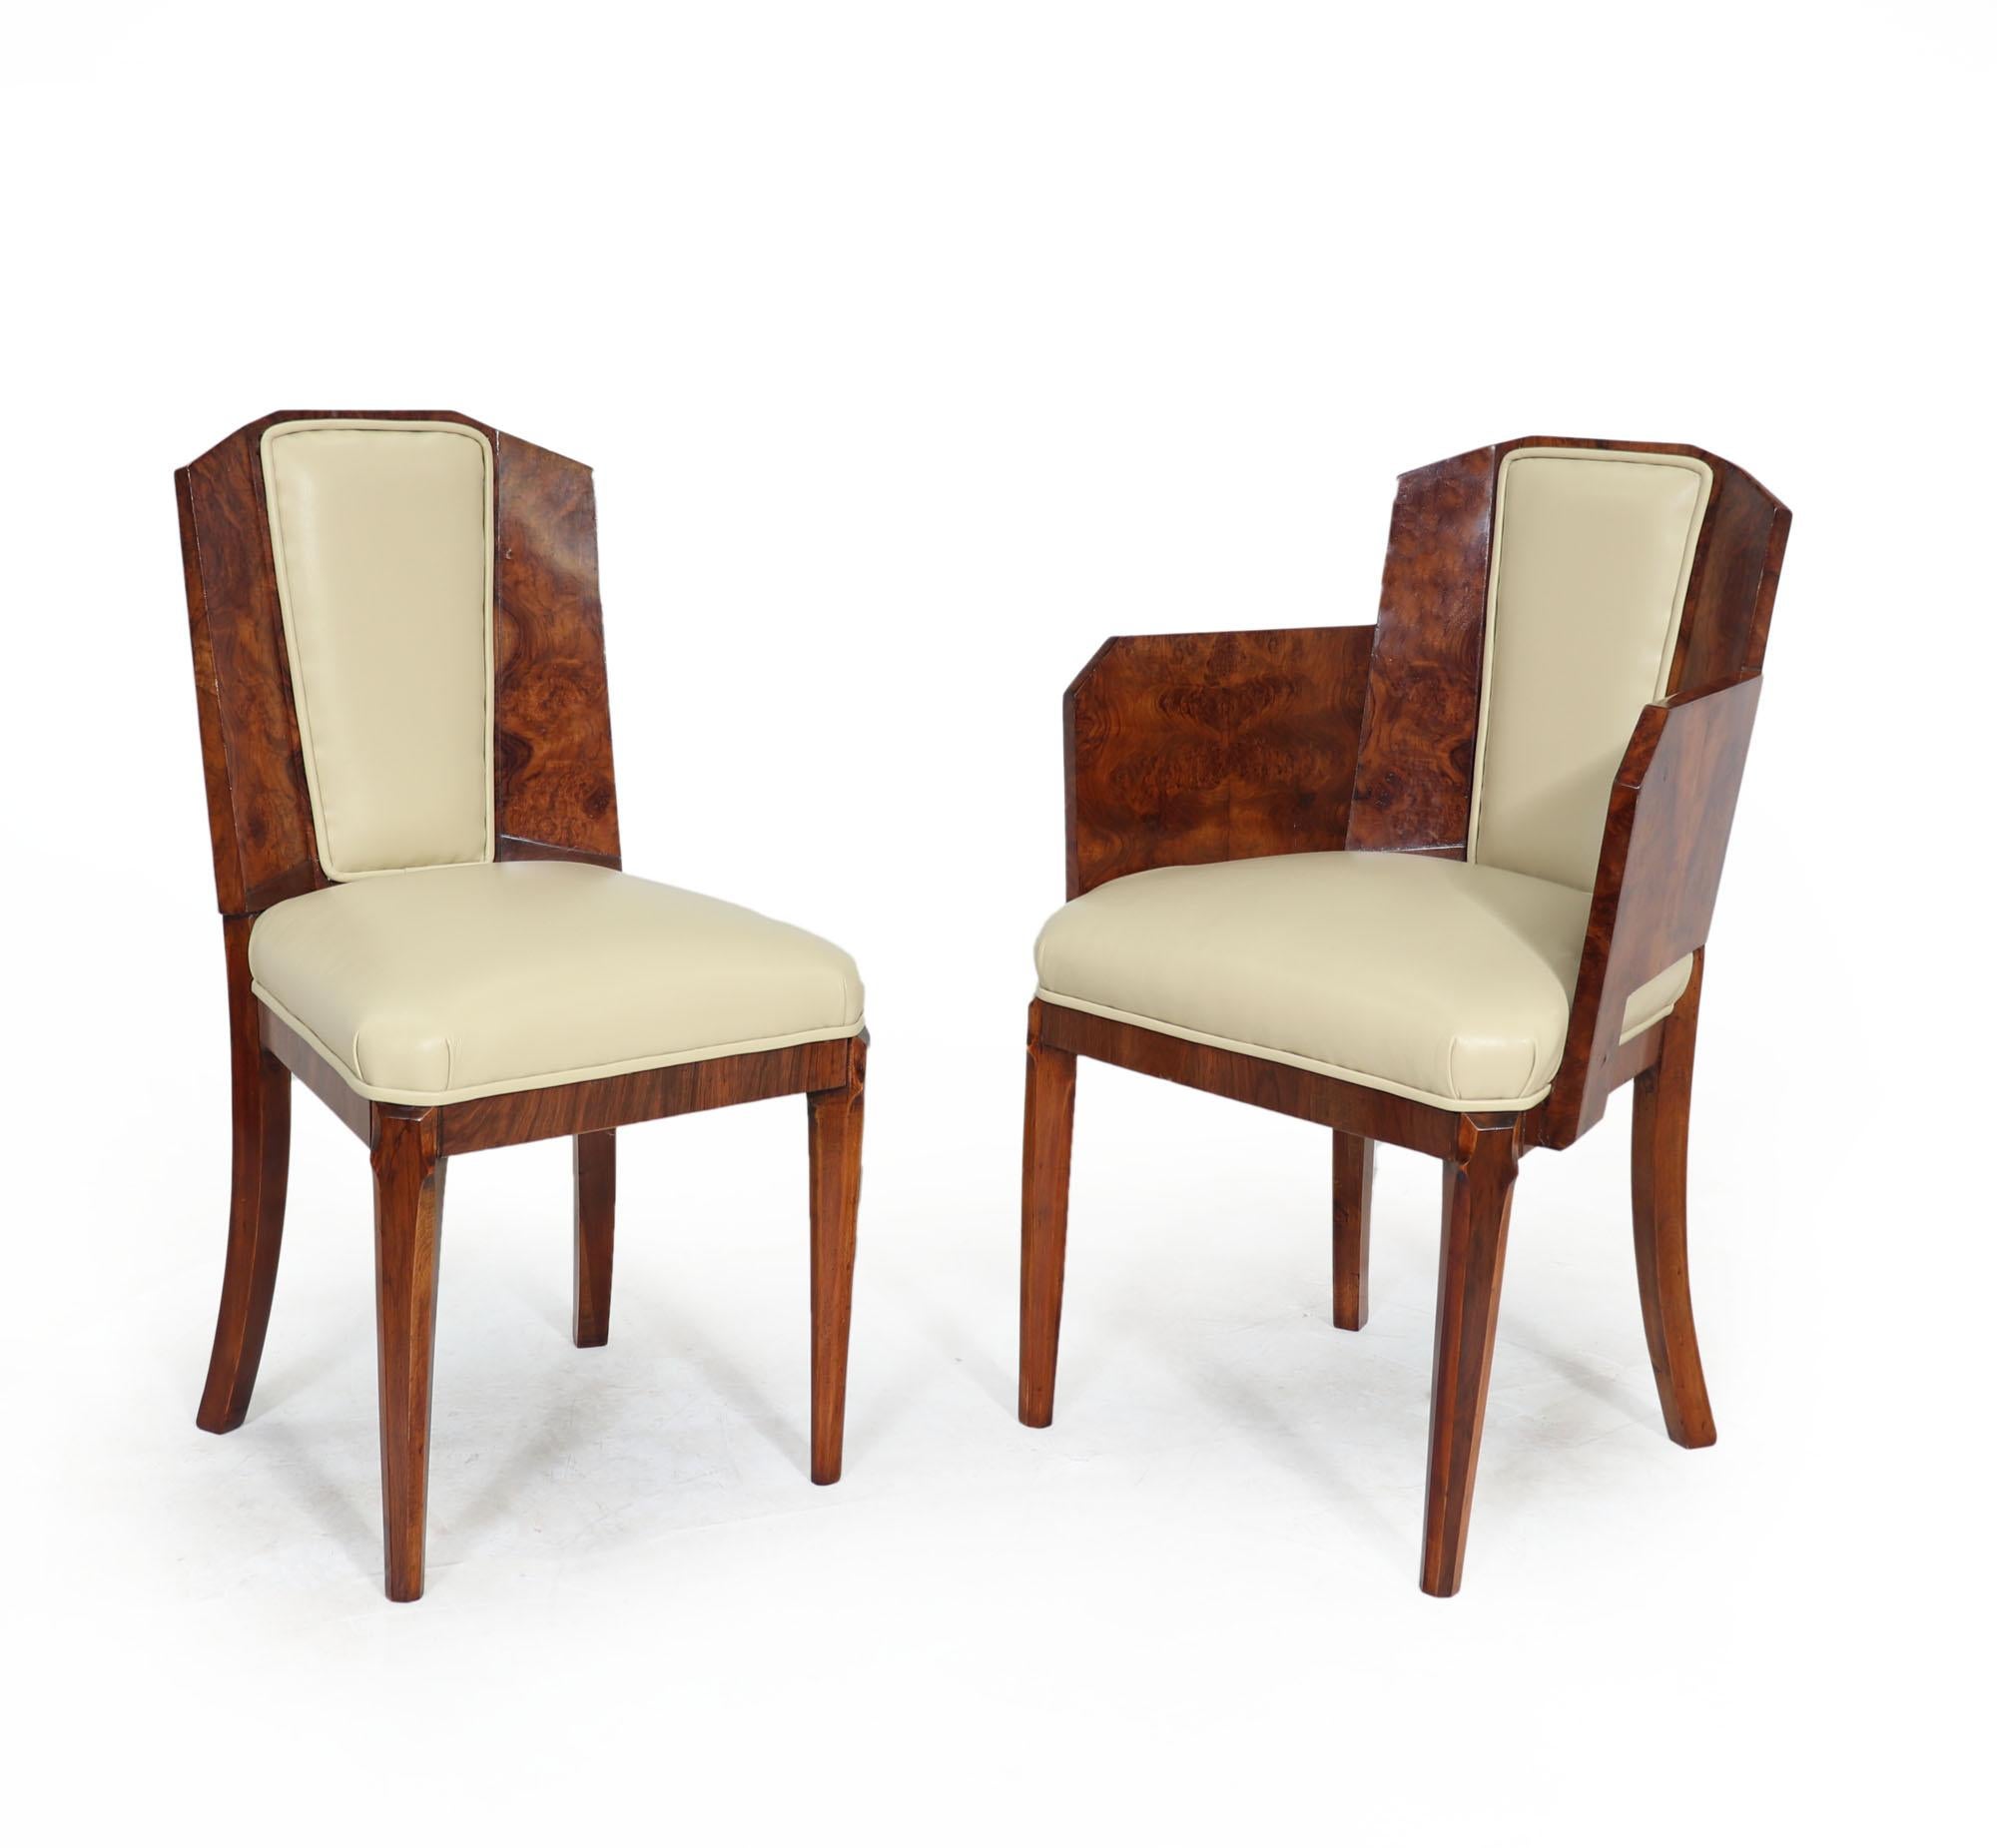 Chairs by Hille
This Art Deco dining table and chairs by Hille is the perfect way to add a touch of luxury to your home. produced in the 1930 by top cabinetmakers of this era the table has a cloud shaped top and two pedestal upright all in burr